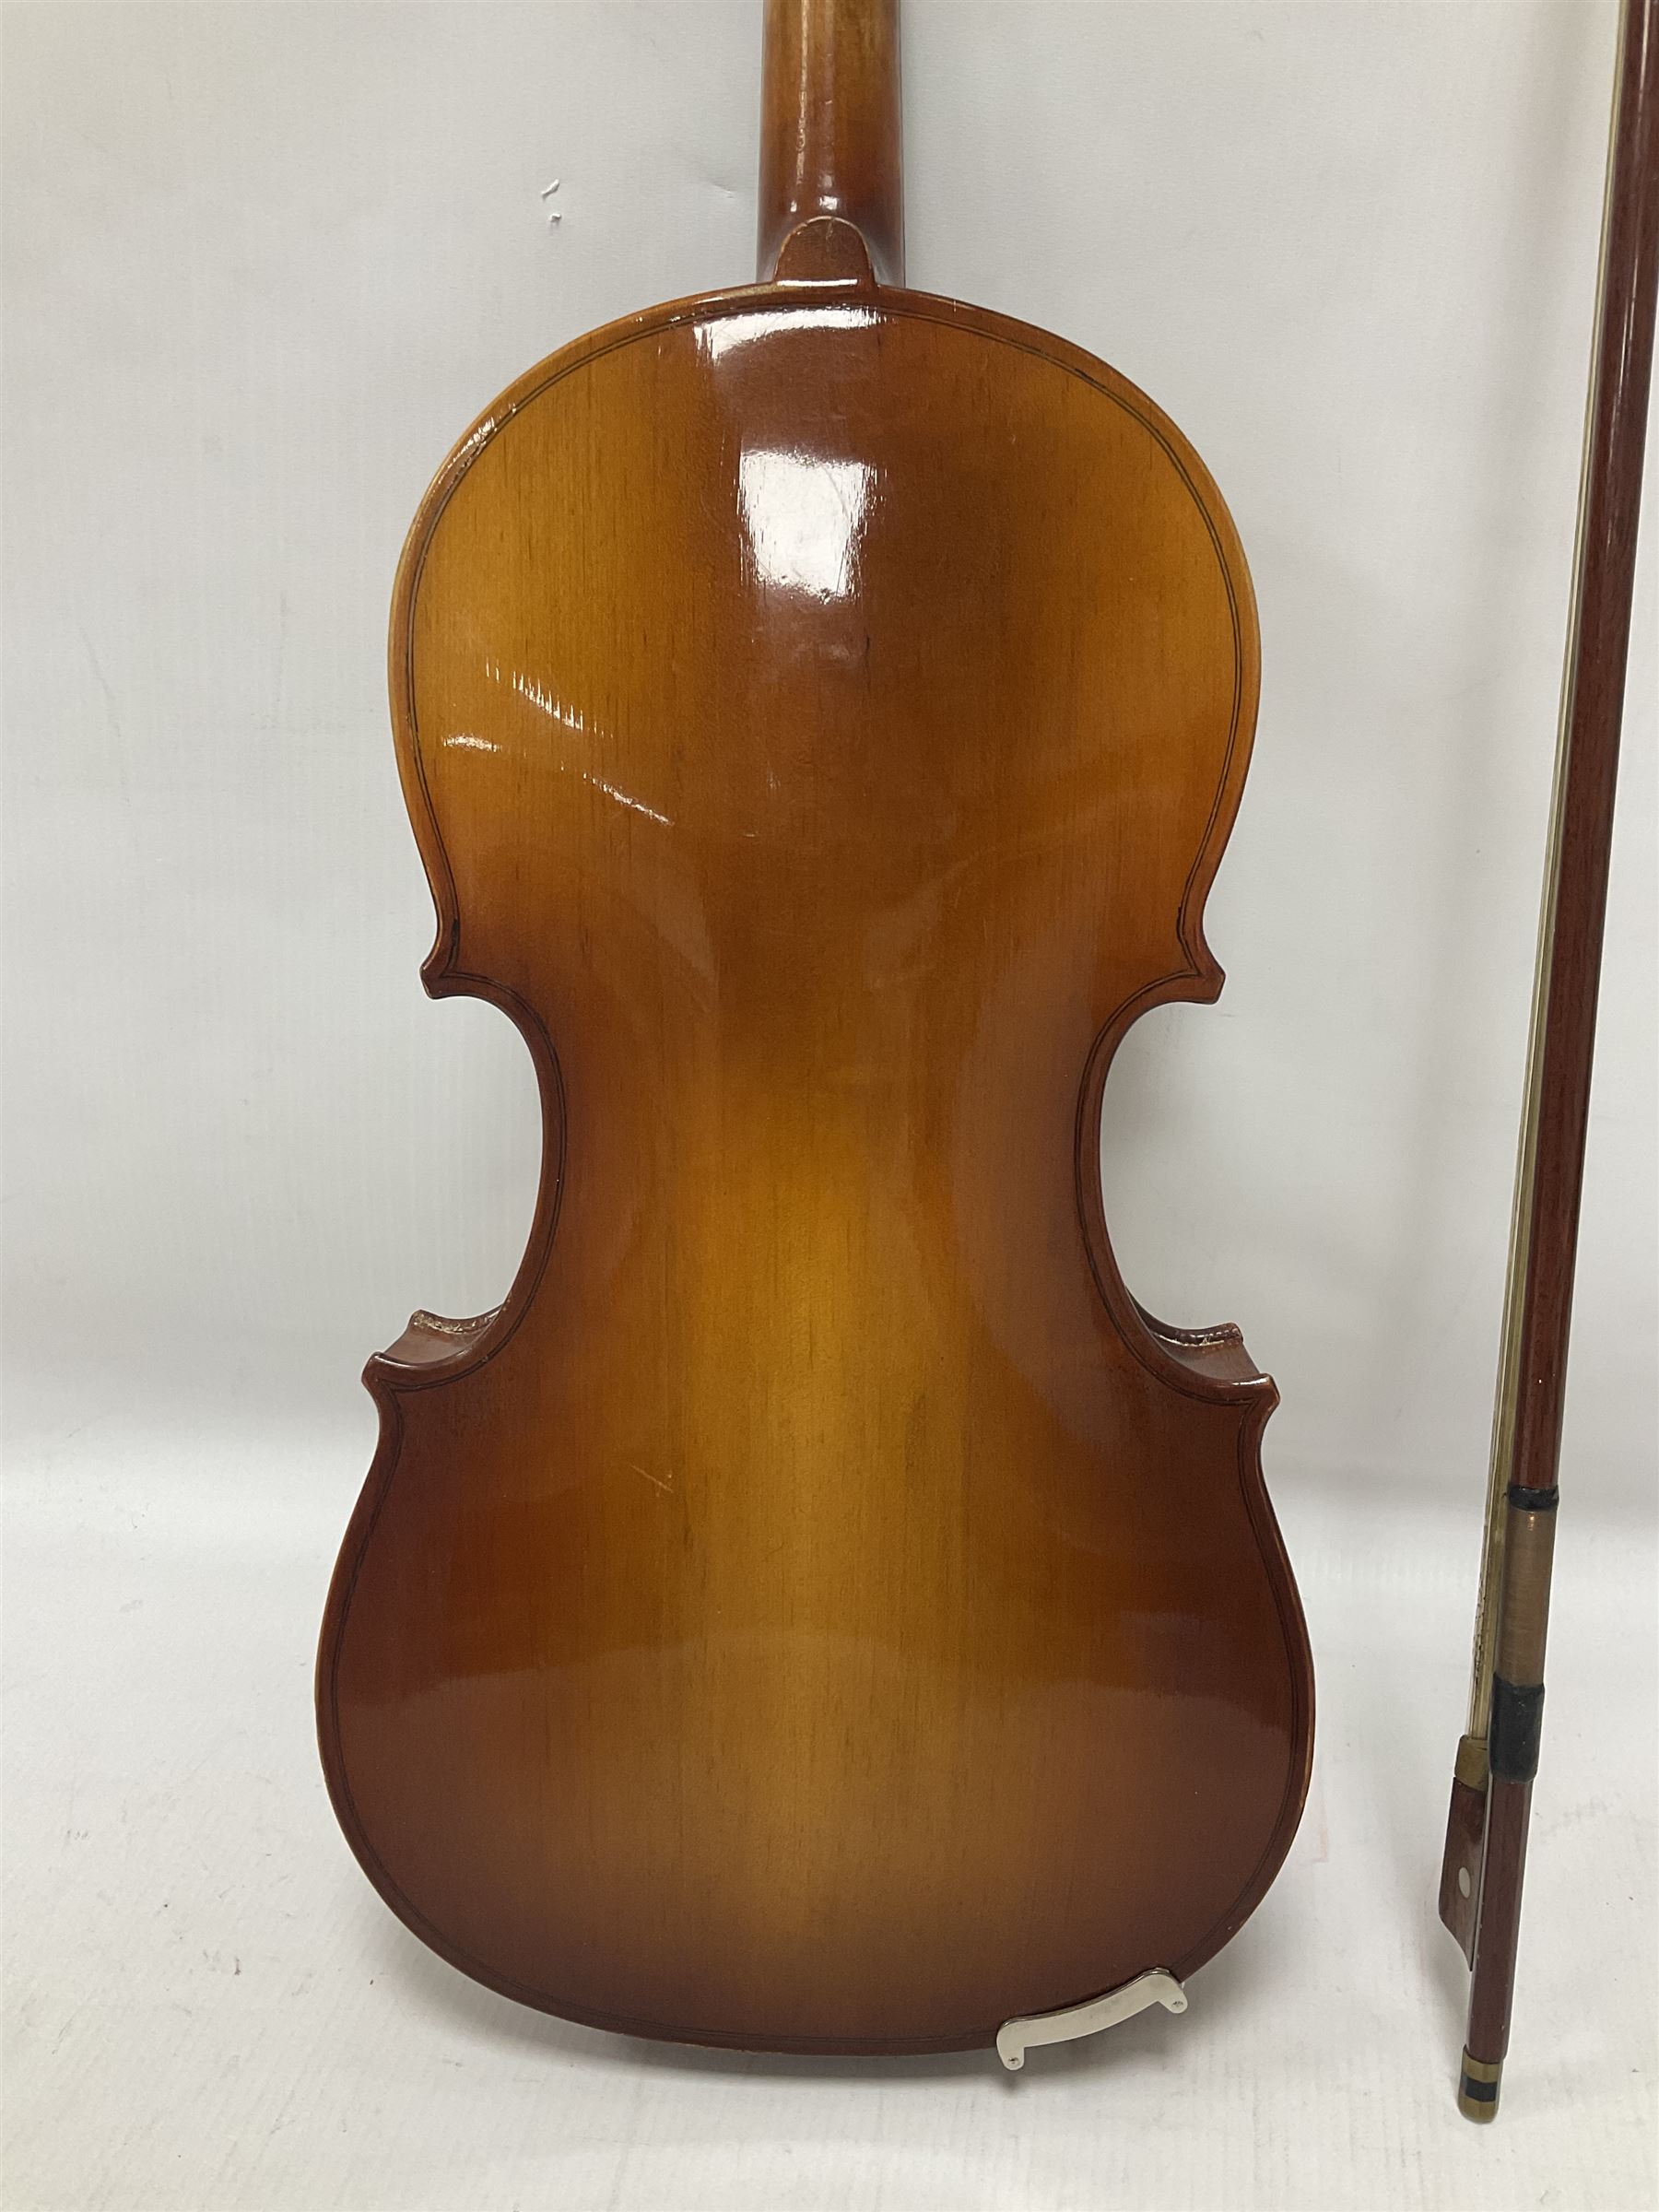 Full size violin with a maple back and ribs - Image 14 of 21